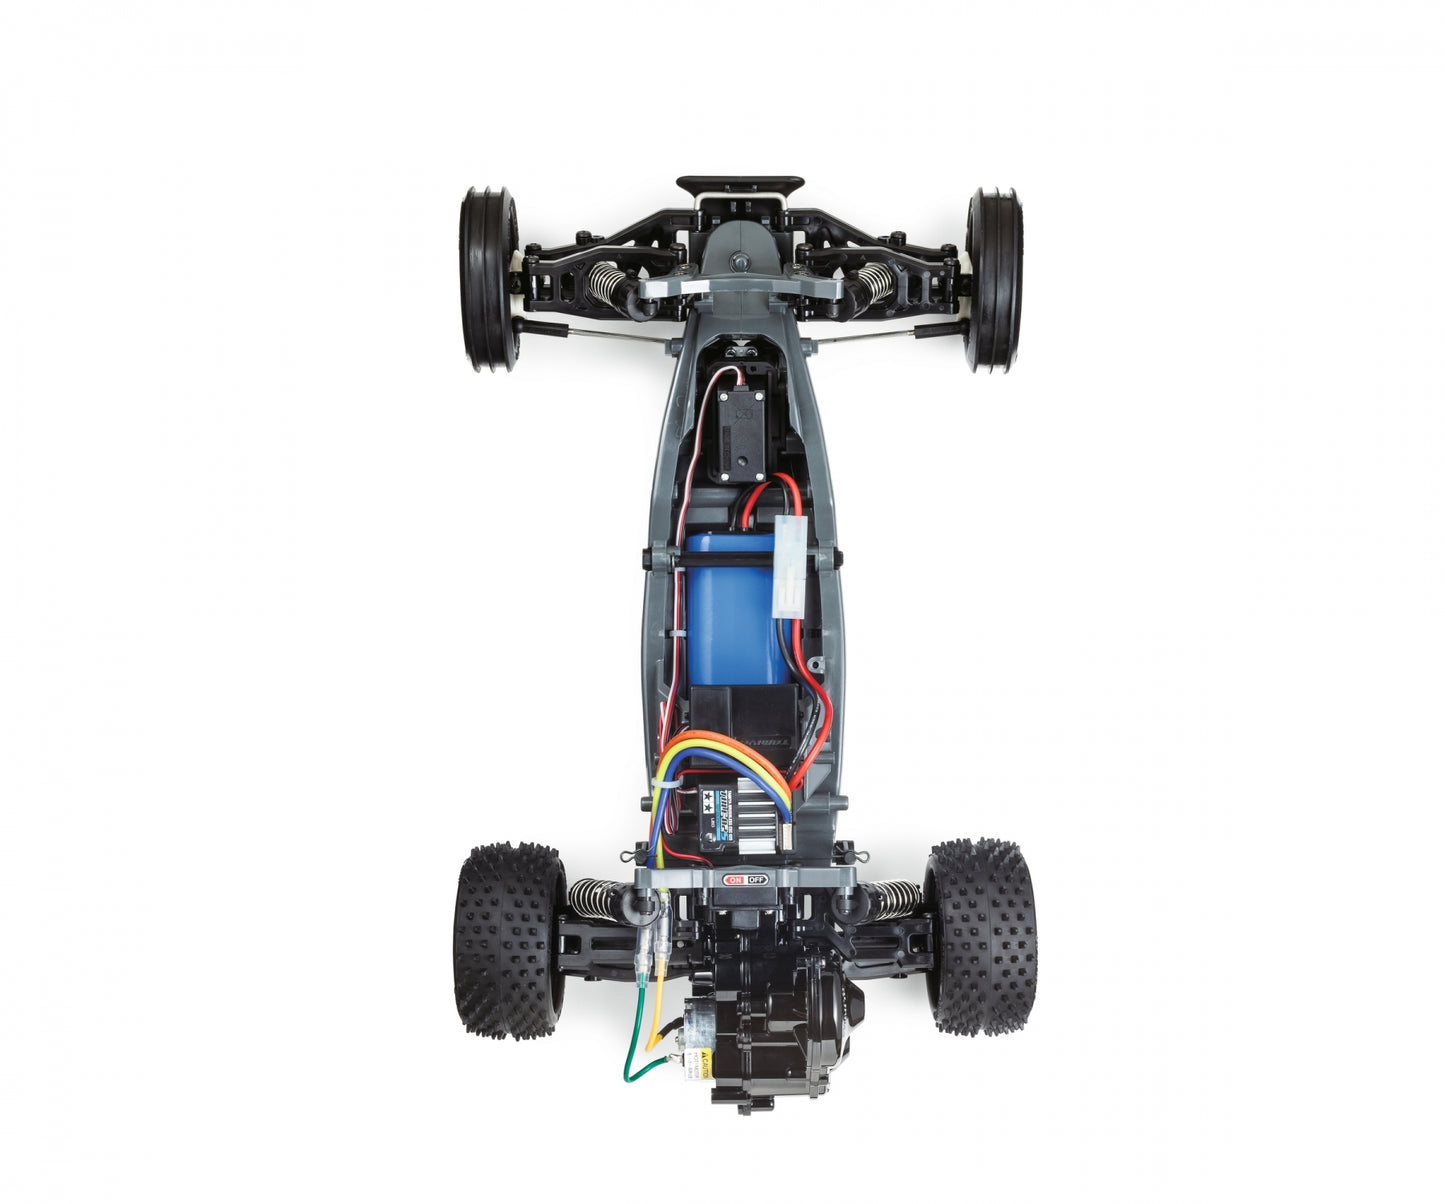 Racing Fighter 2WD RC-Buggy (DT-03), Bausatz